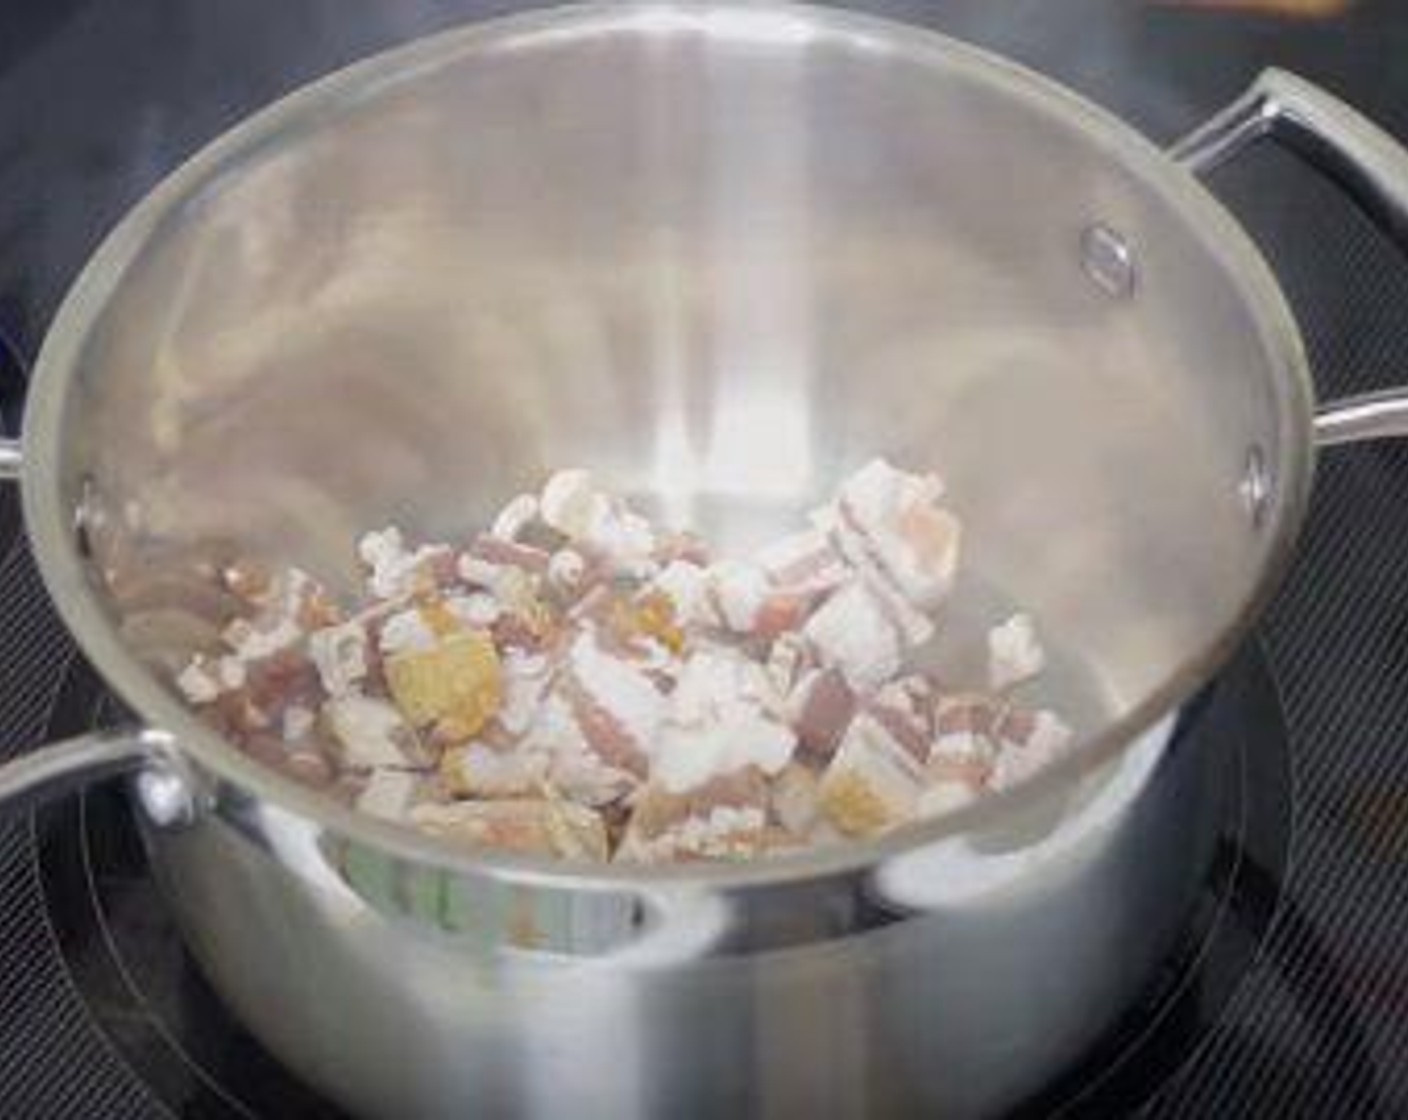 step 1 In a large pot over medium high heat, cook the Bacon (8 slices) until crispy, for about 5 minutes. Remove to a paper towel lined plate. Remove bacon fat from the pan.